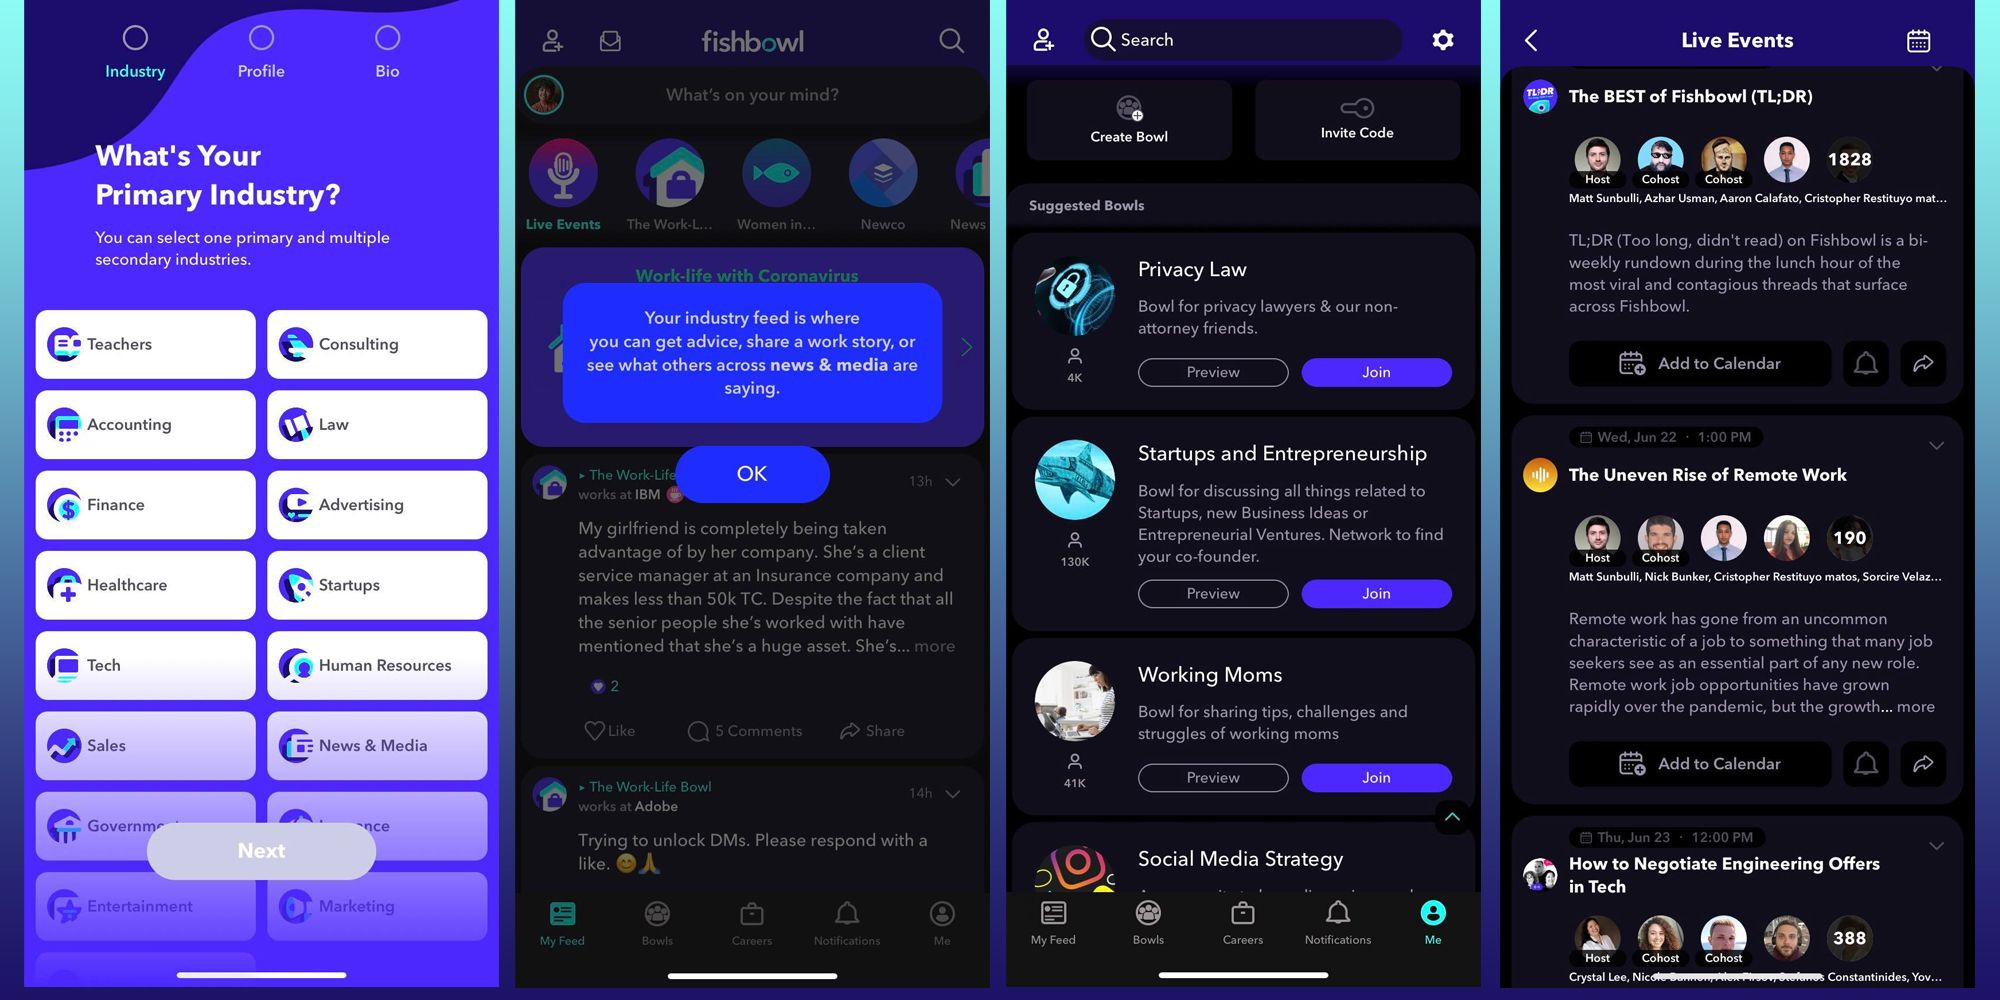 fishbowl app features